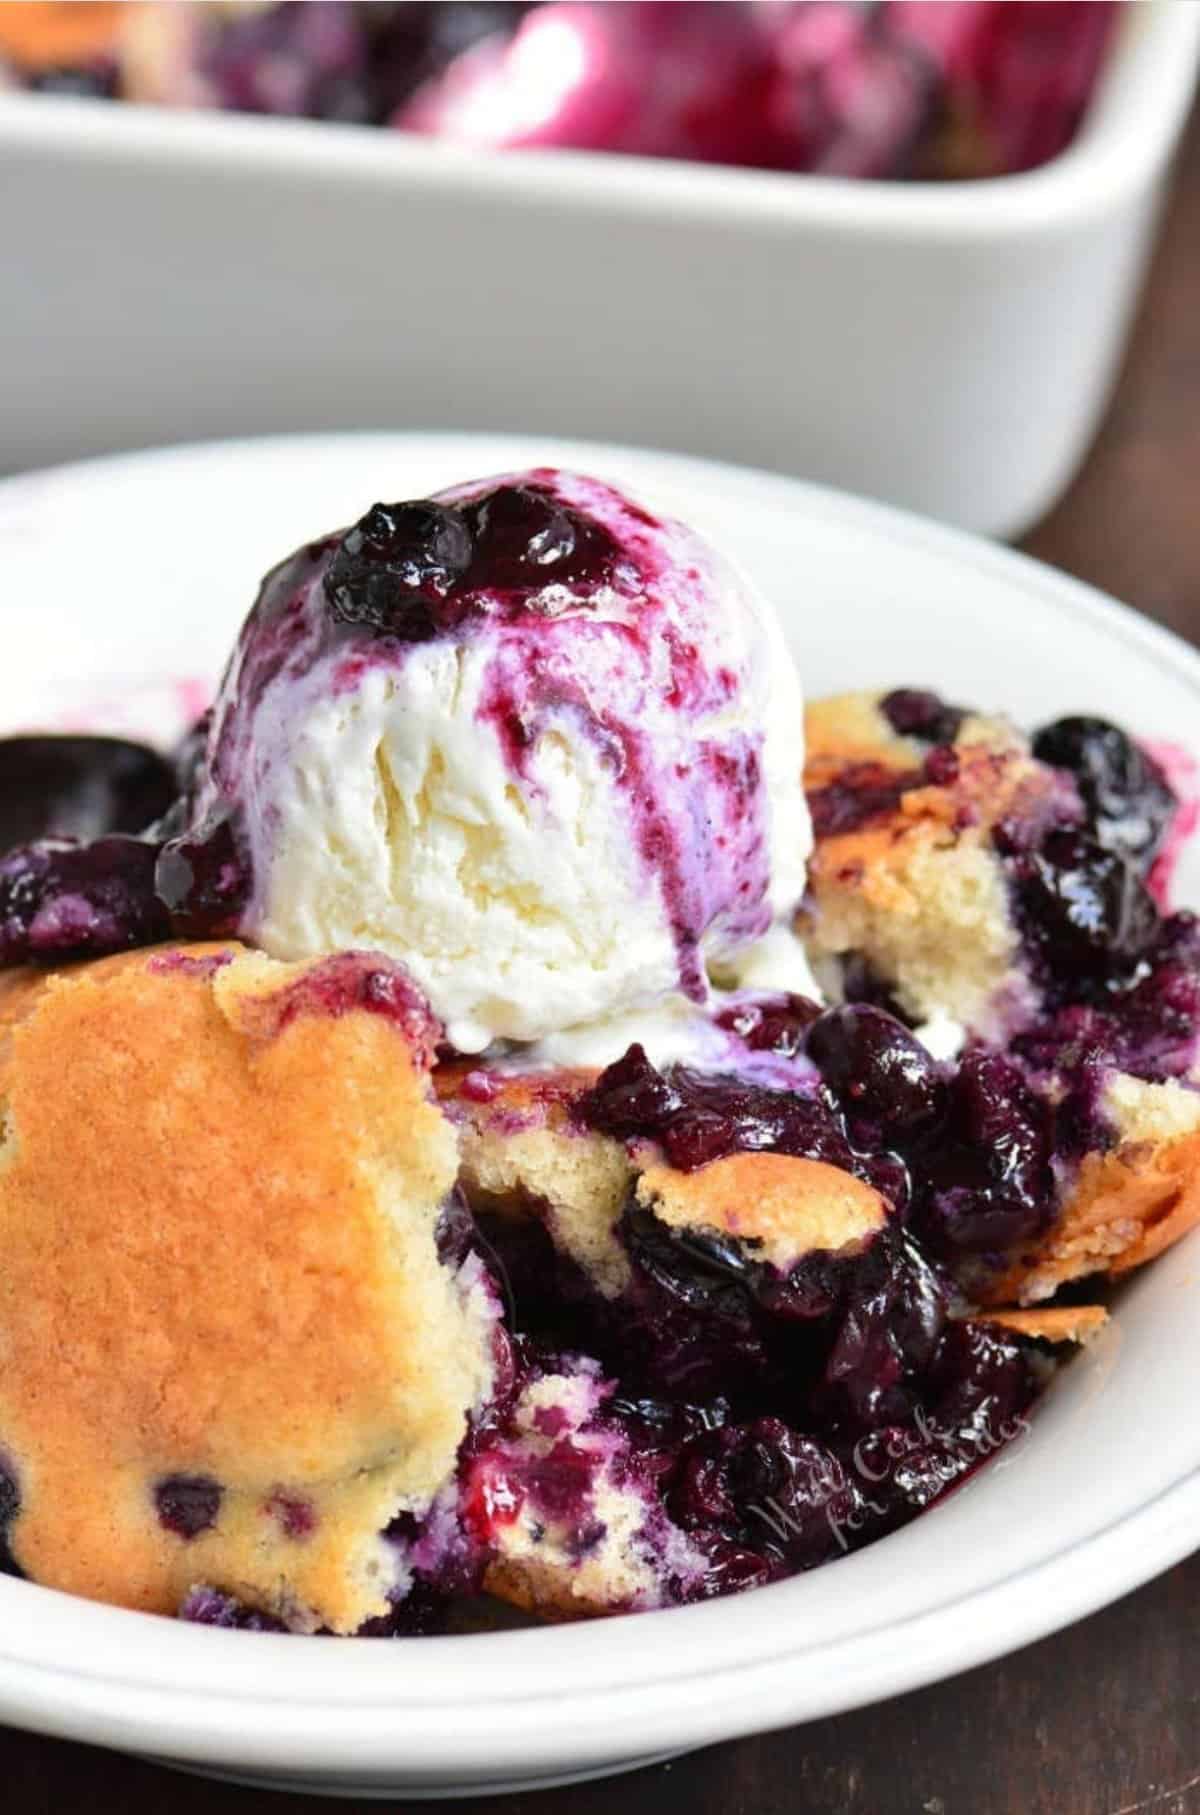 blueberry cobbled topped with ice cream in a white bowl.